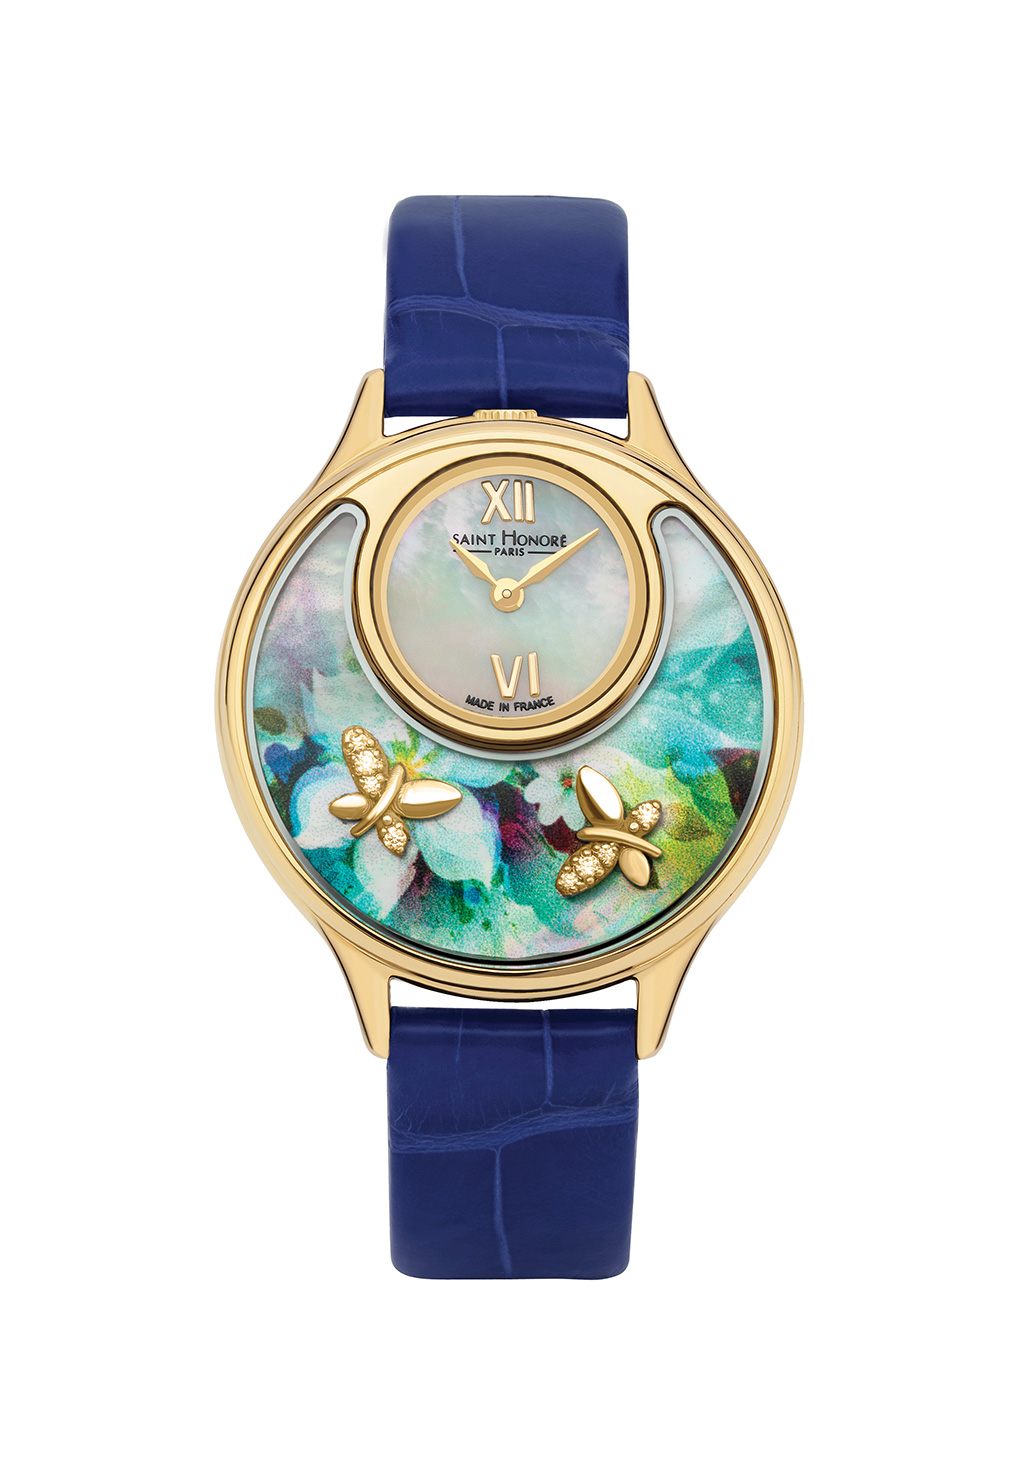 DAUPHINE Women's watch - ion plating gold, wht mop dial, blue leather strap